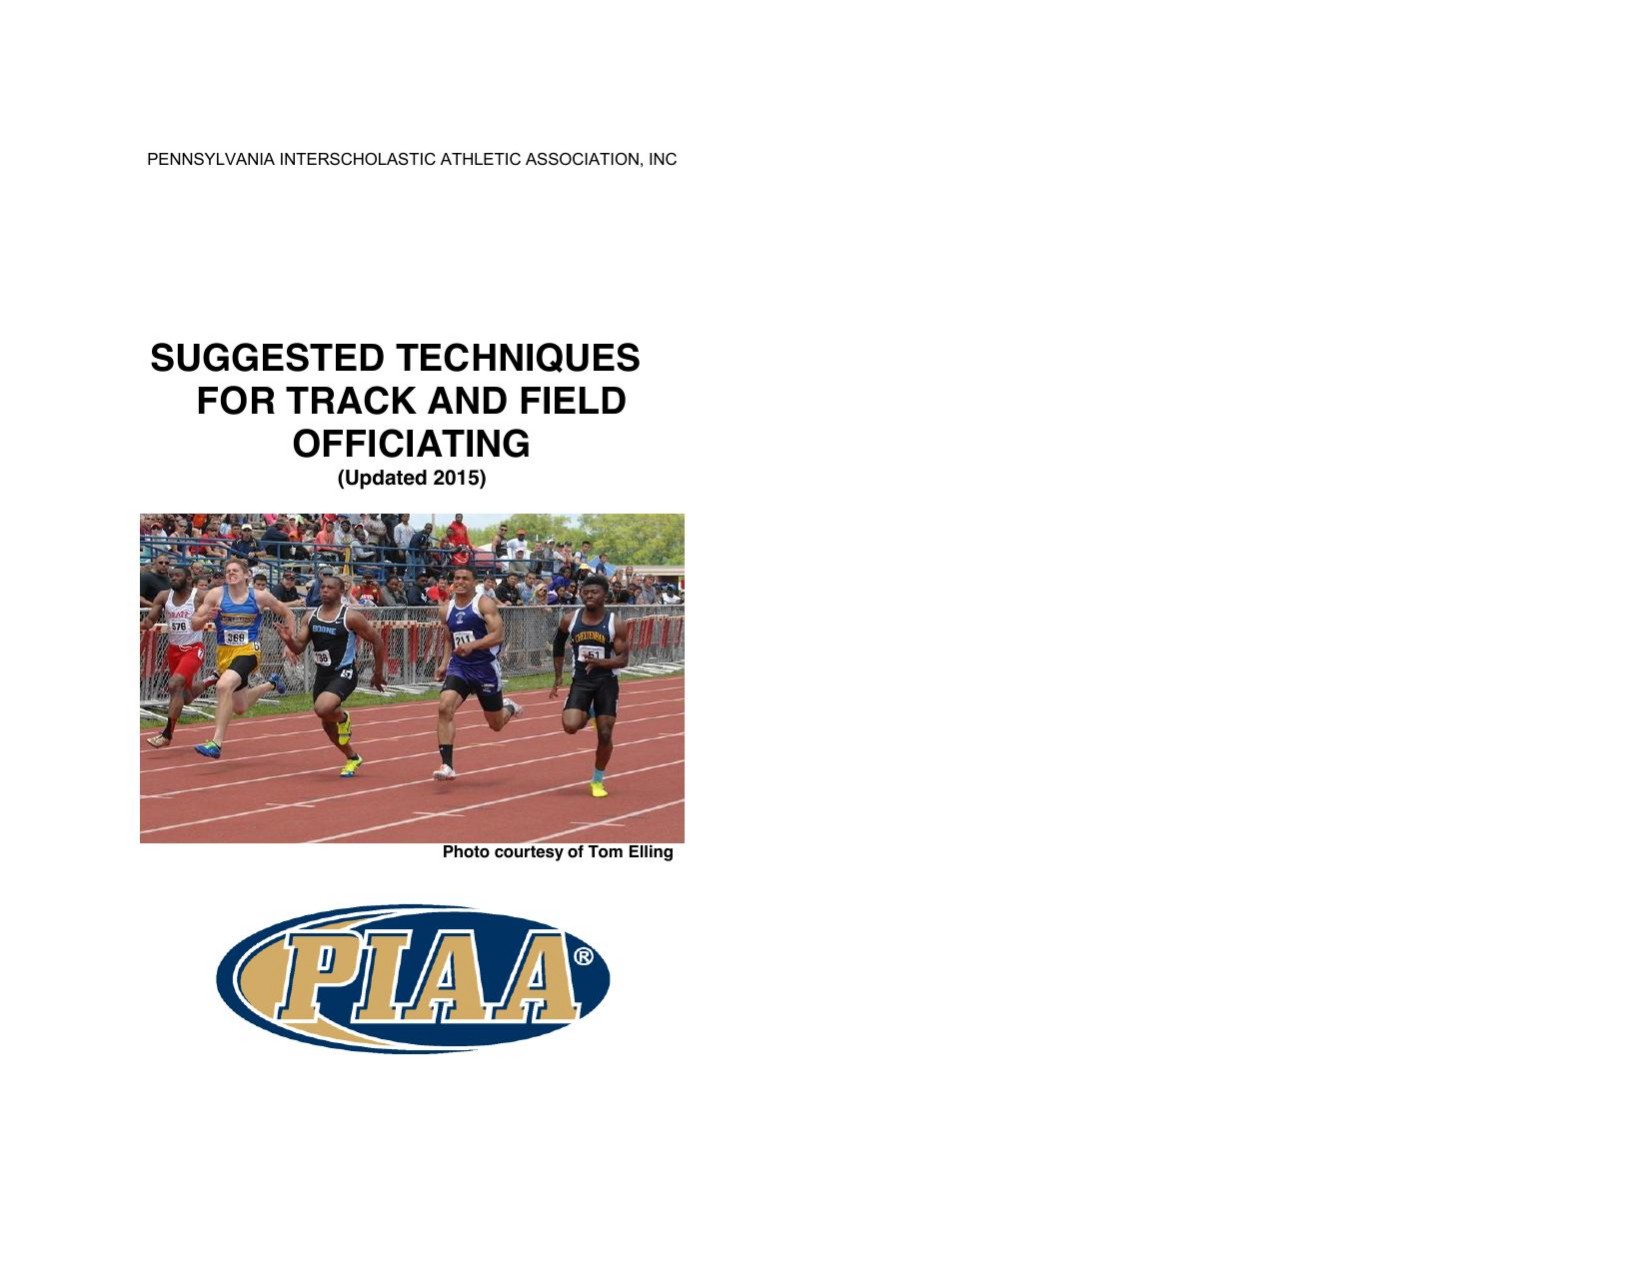 SUGGESTED TECHNIQUES FOR TRACK & FIELD OFFICIATING(1).pdf